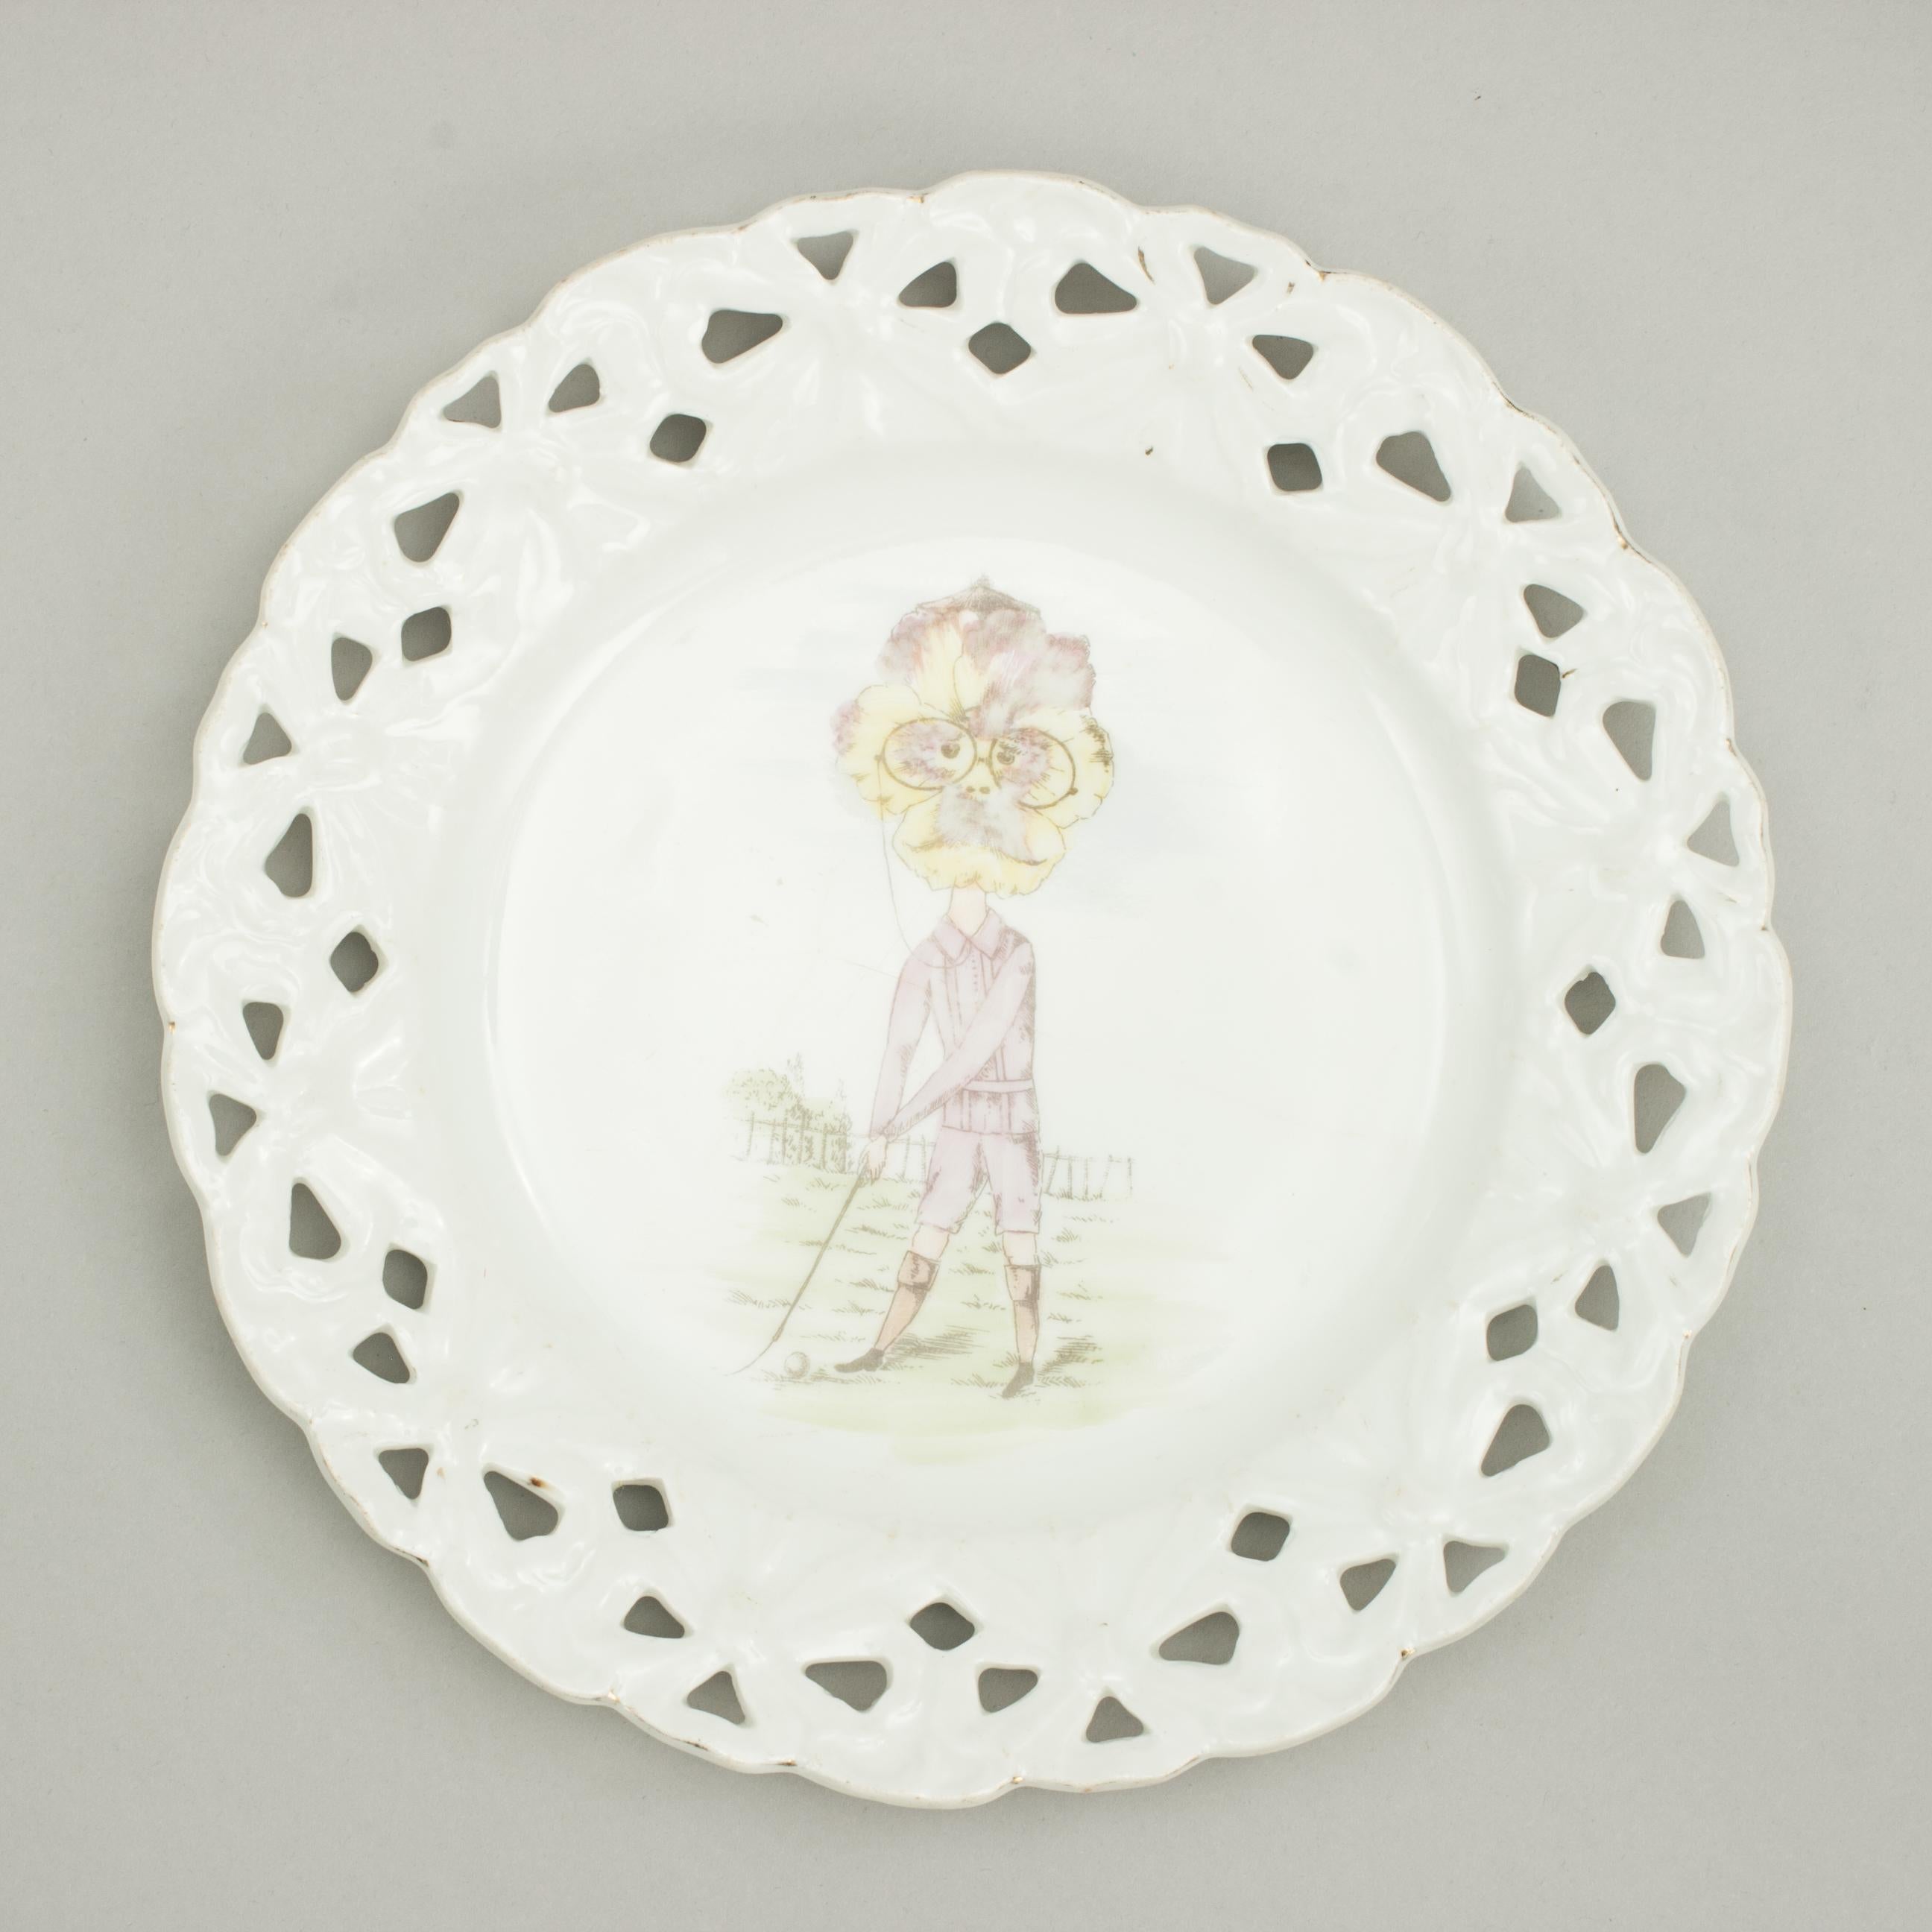 Unusual Ceramic Golf Plate With Flower In Good Condition For Sale In Oxfordshire, GB